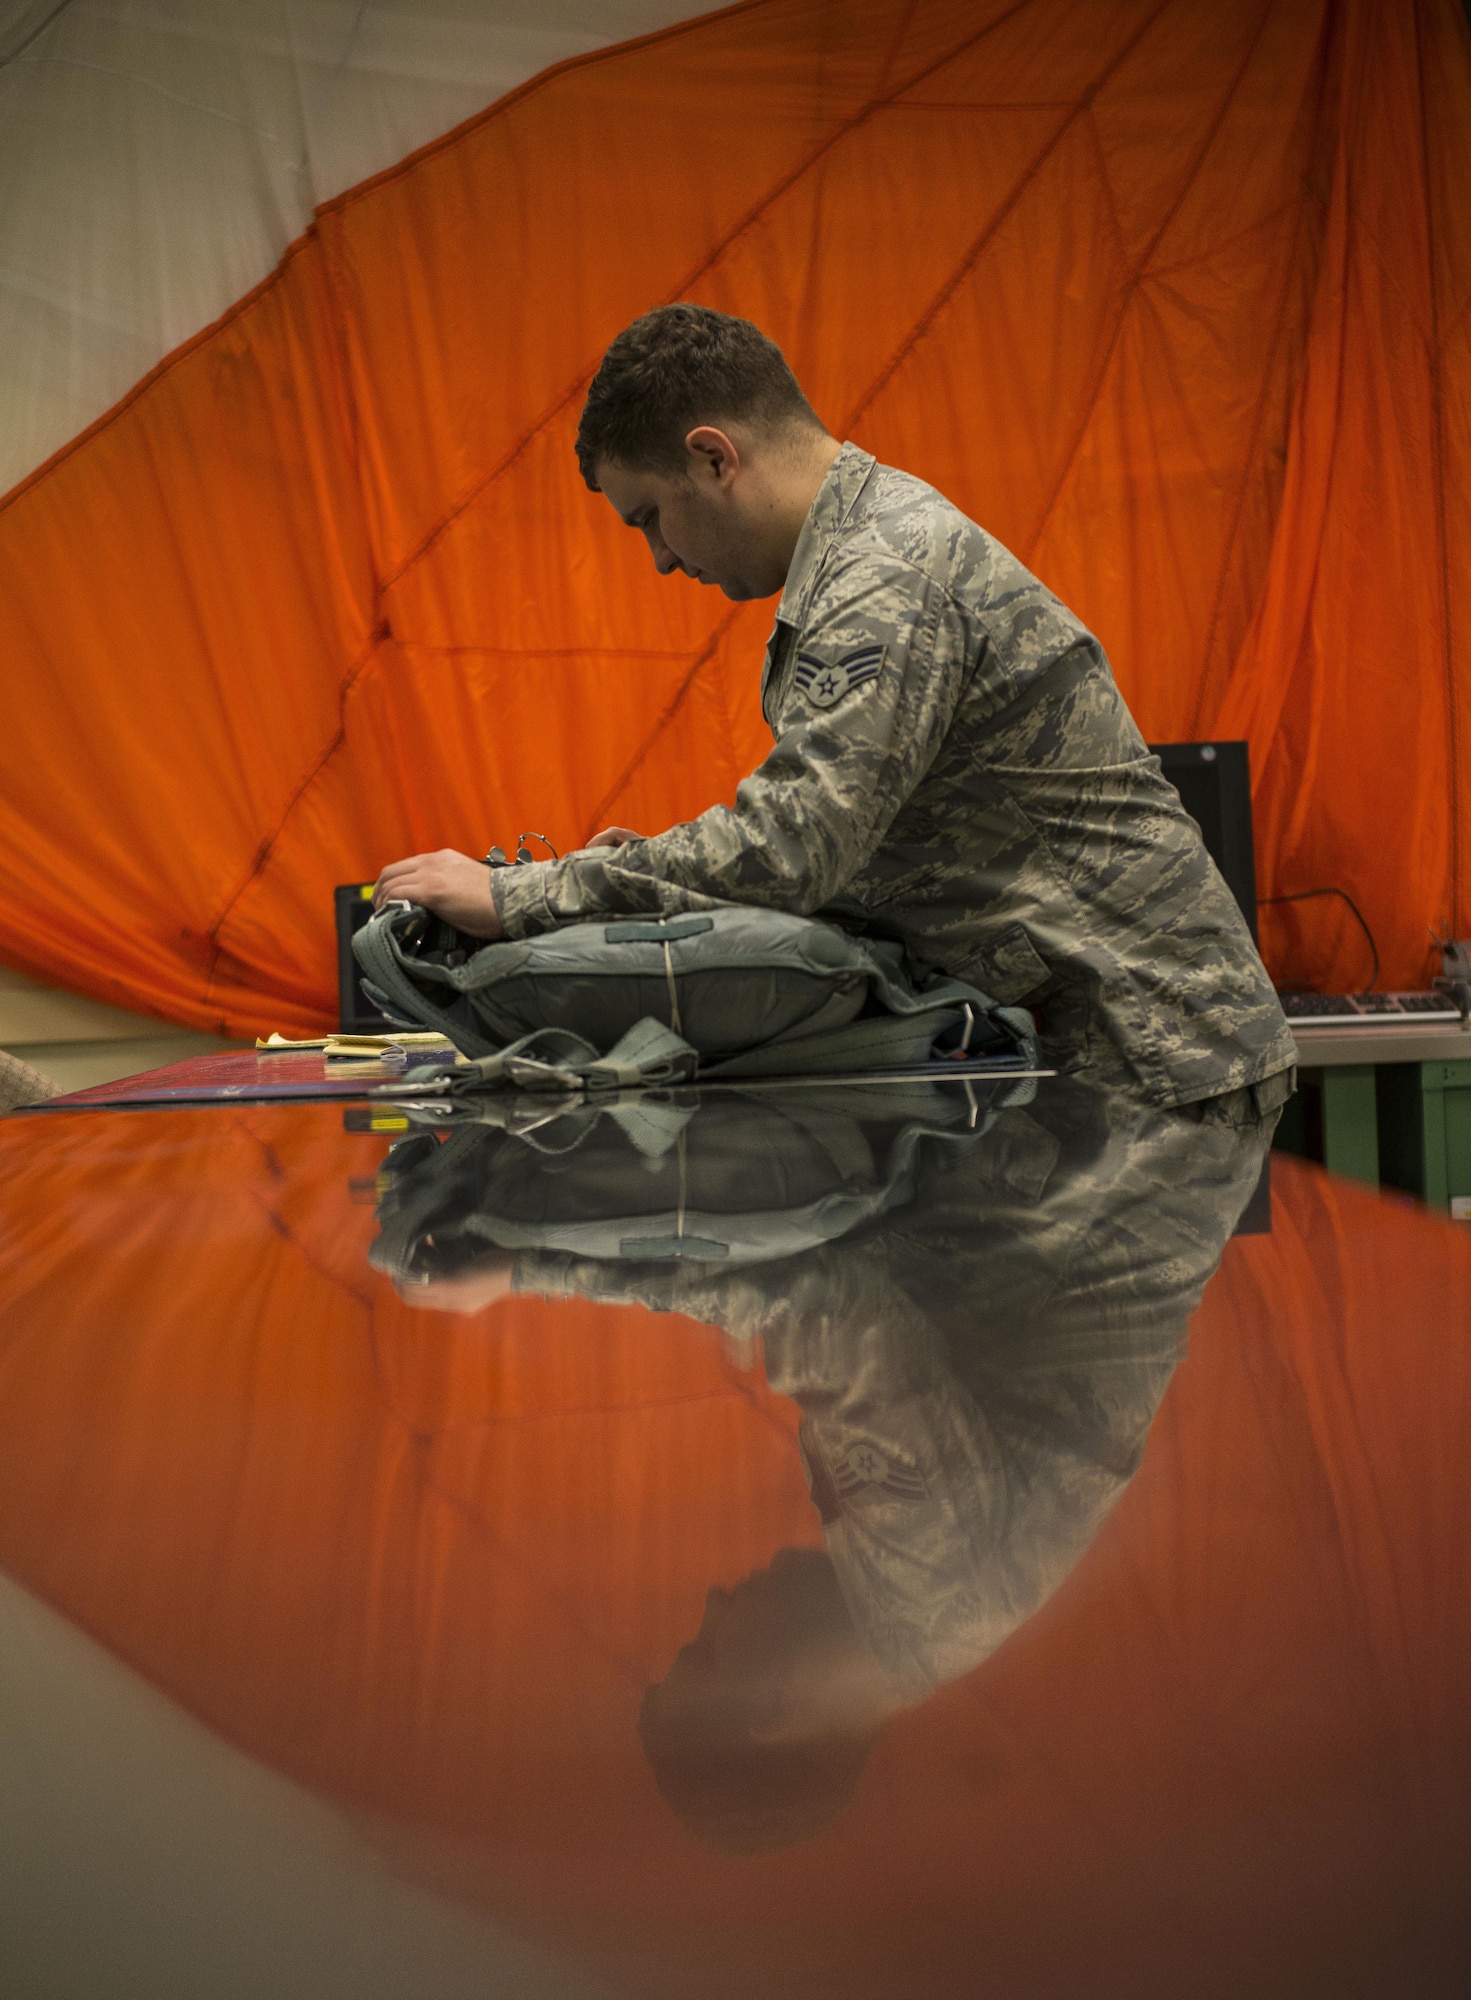 Senior Airman Justin Turner  inspects a parachute before storing it for future use Feb. 9, 2015, at Joint Base Charleston, S.C. Aircrew flight equipment (AFE) technicians work through the night to provide aircrew members with safe and reliable equipment, including night vision goggles, helmets, masks and even parachutes. Turner is a 437th OSS AFE technician. (U.S. Air Force photo/Senior Airman Dennis Sloan)